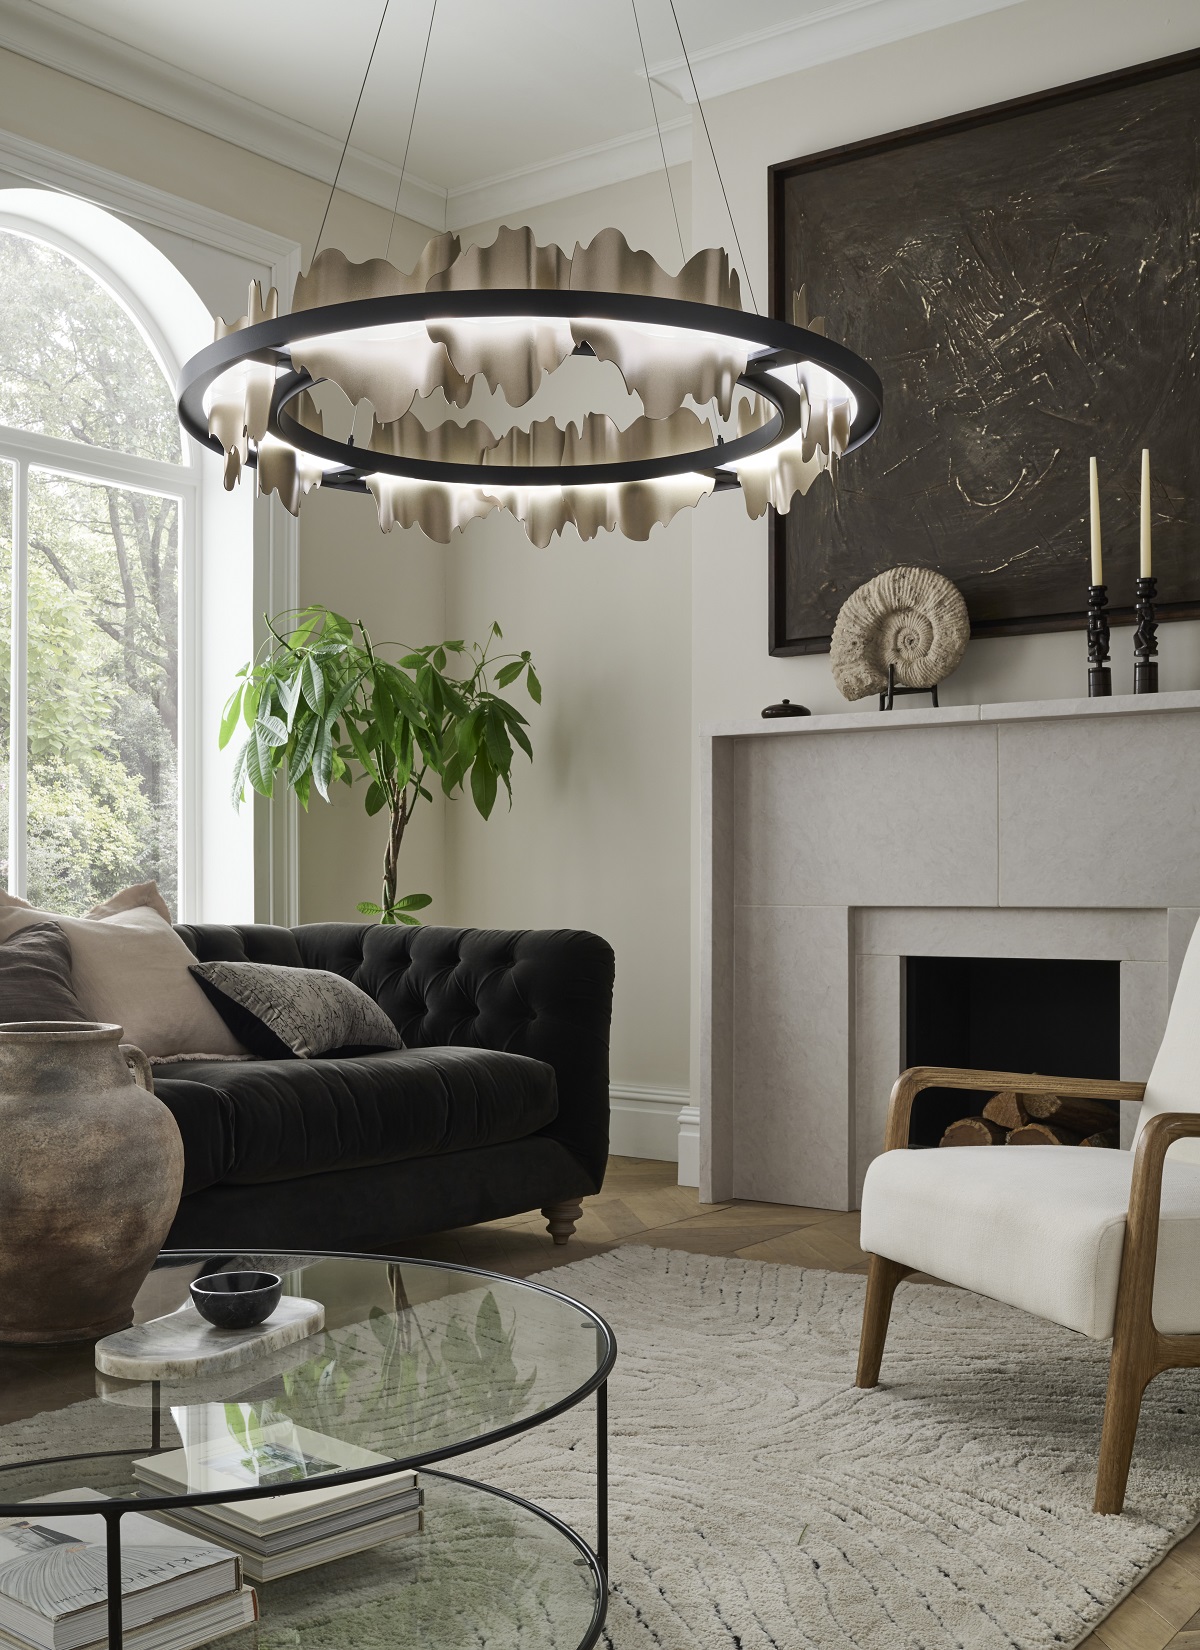 round central light designed by Christopher Hyde above glass coffee table in lounge